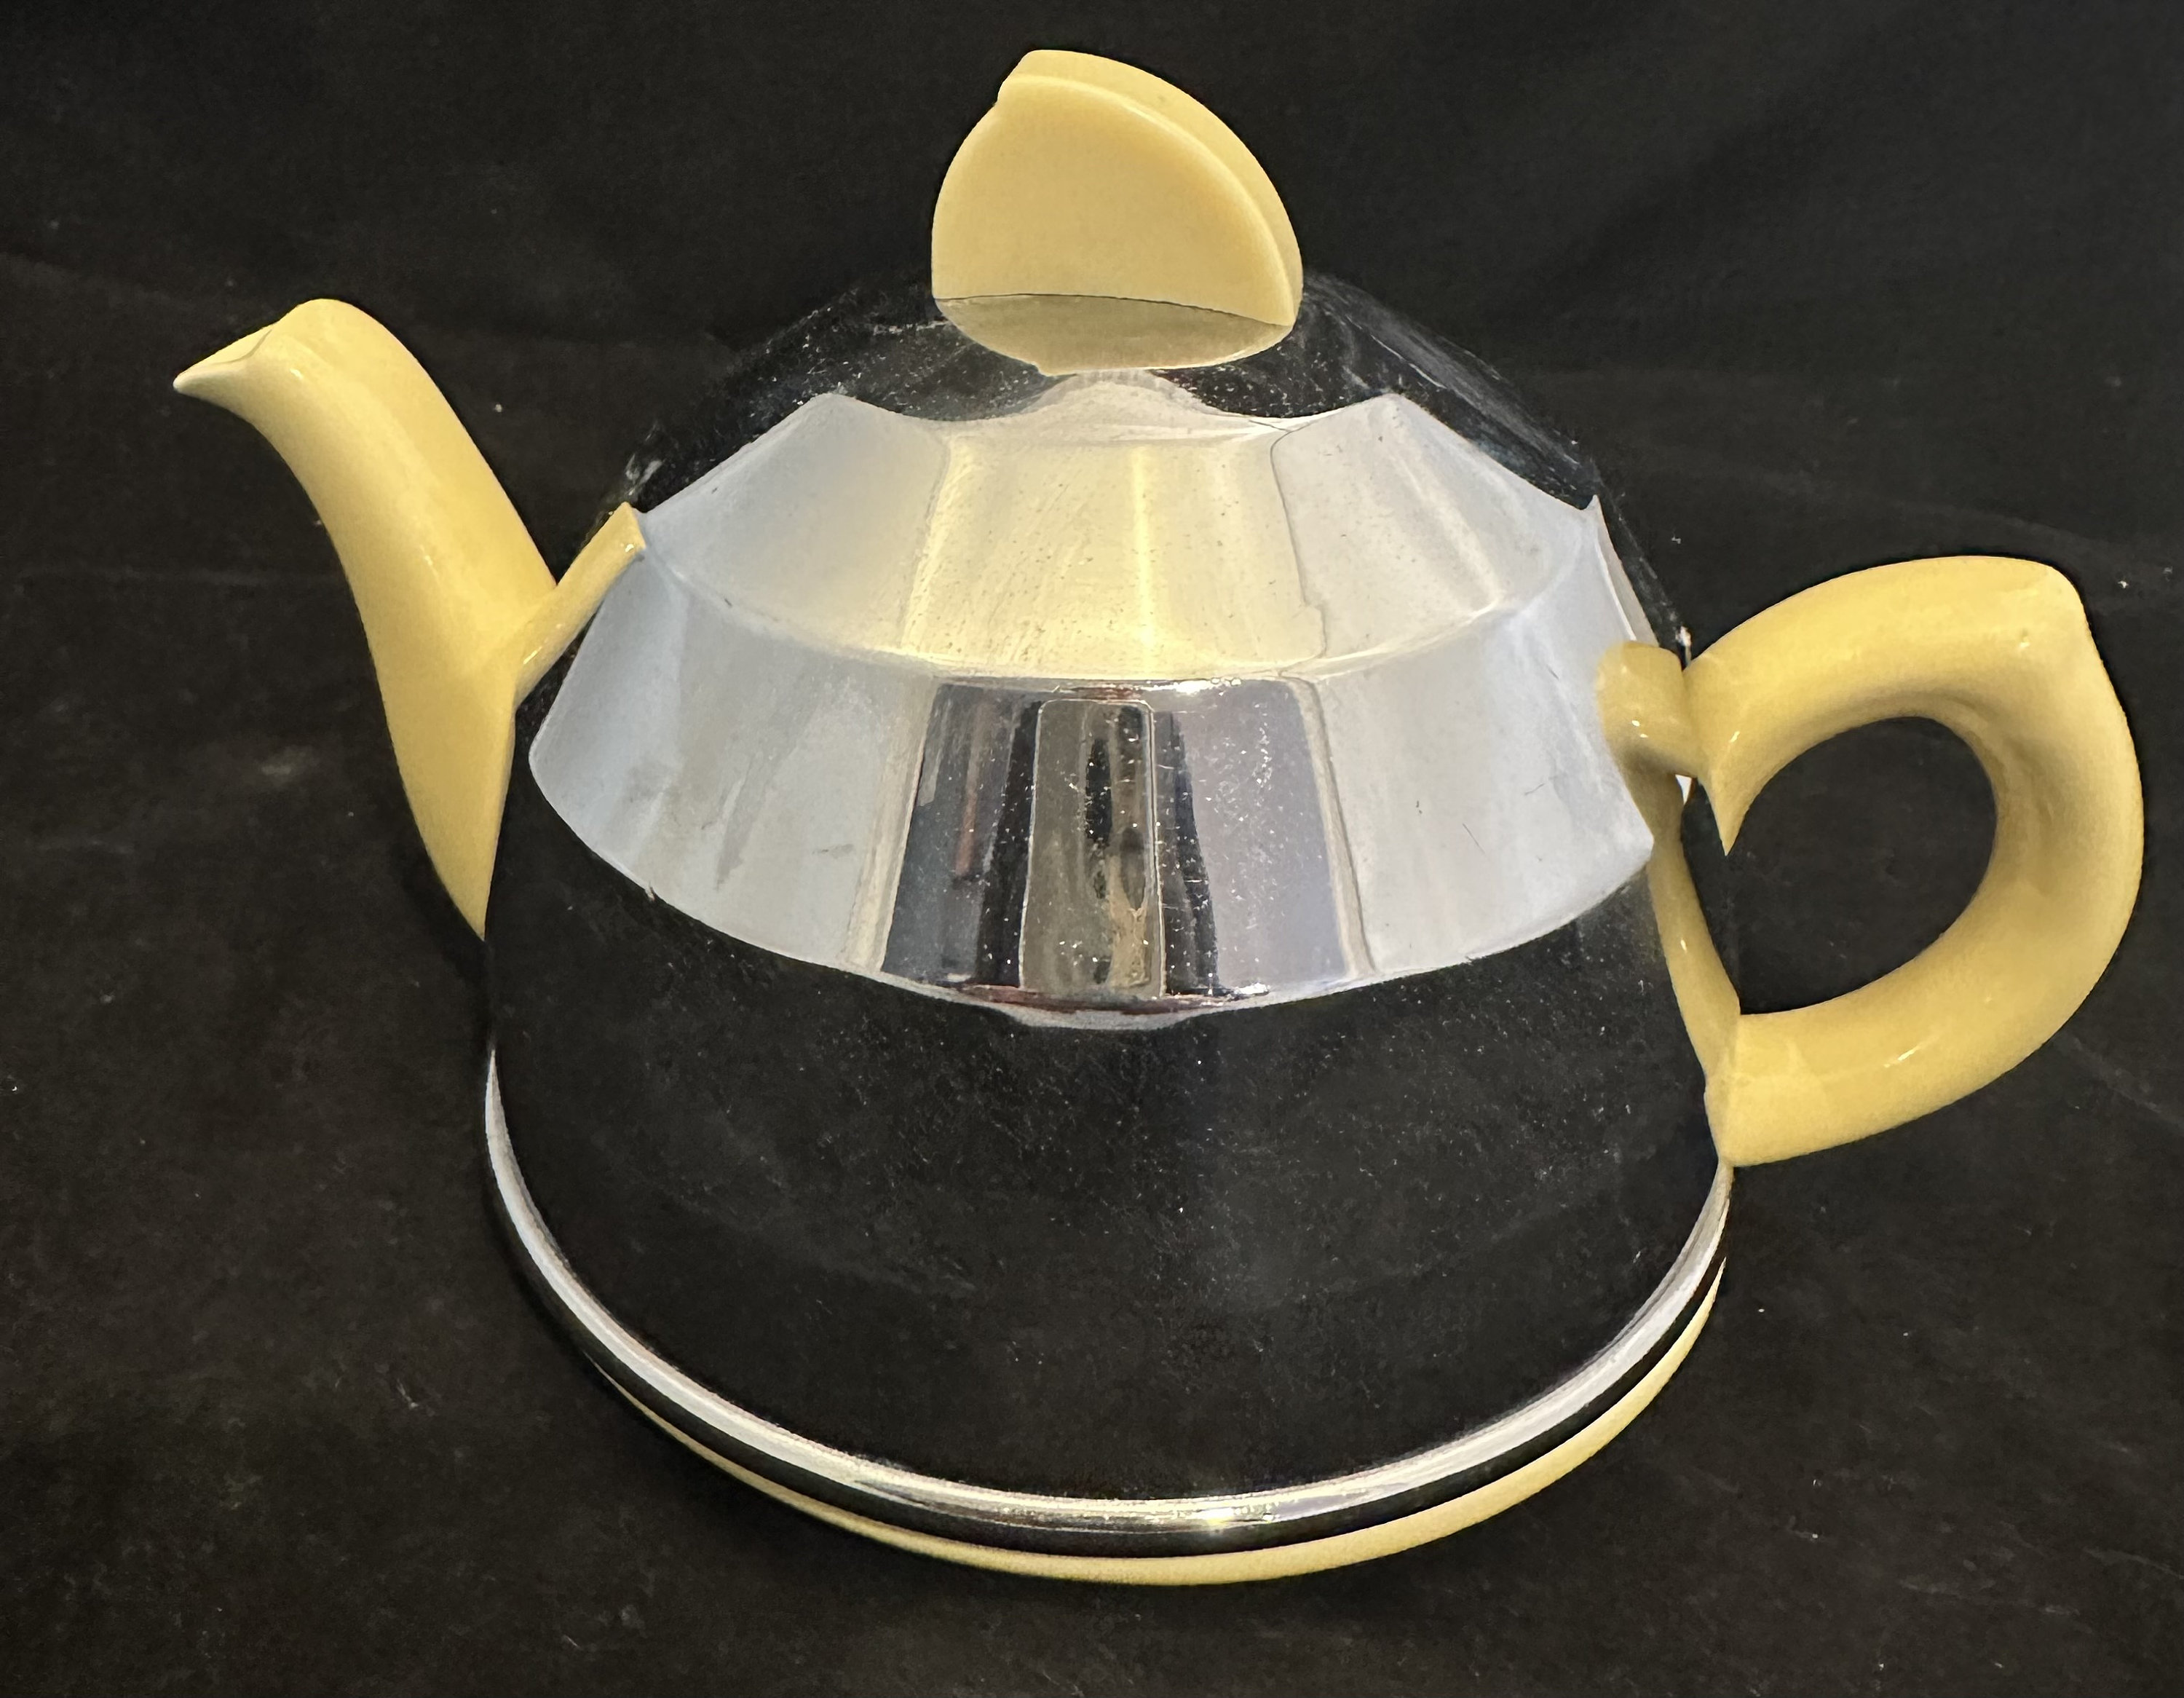 Great 1L Dallah Insulated teapot with glass inner EverichHydro